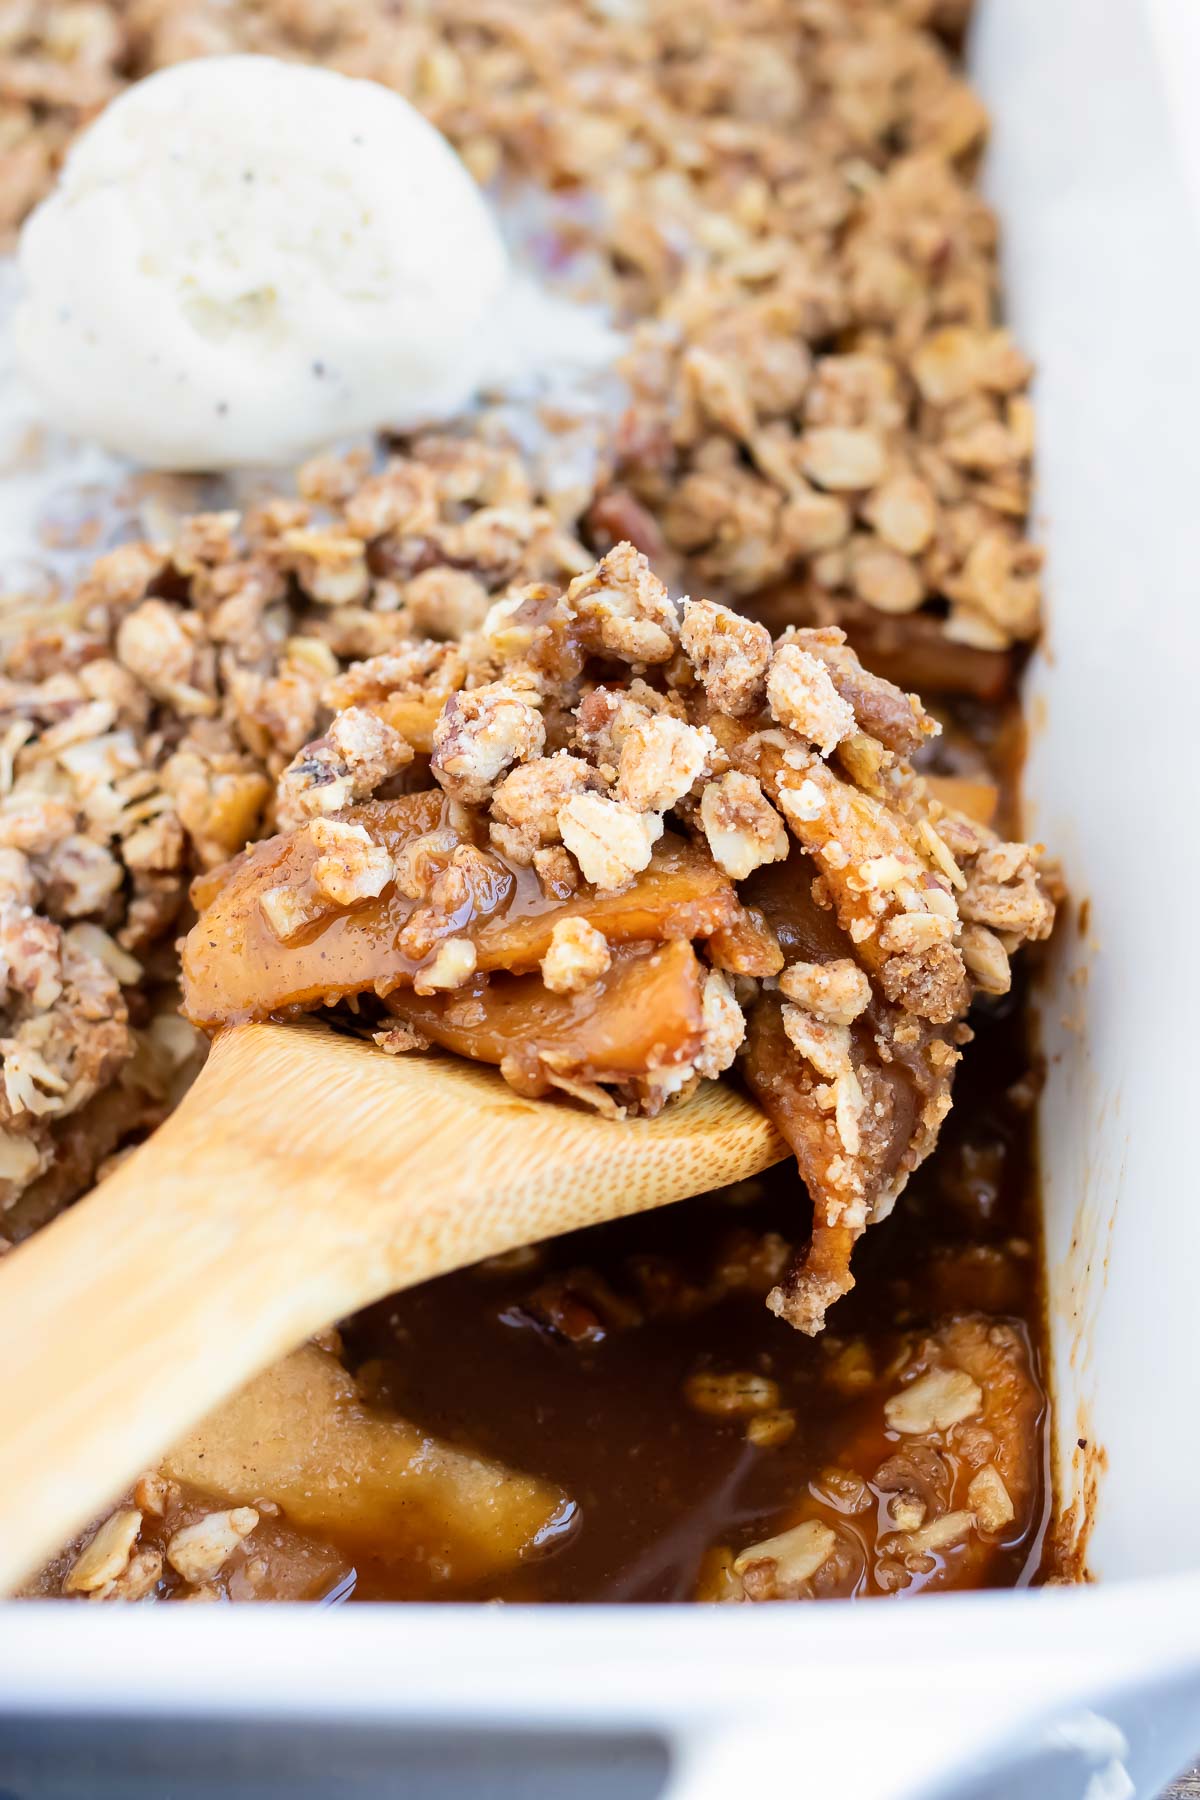 A wooden spoon scooping out a serving of a vegan apple crisp.